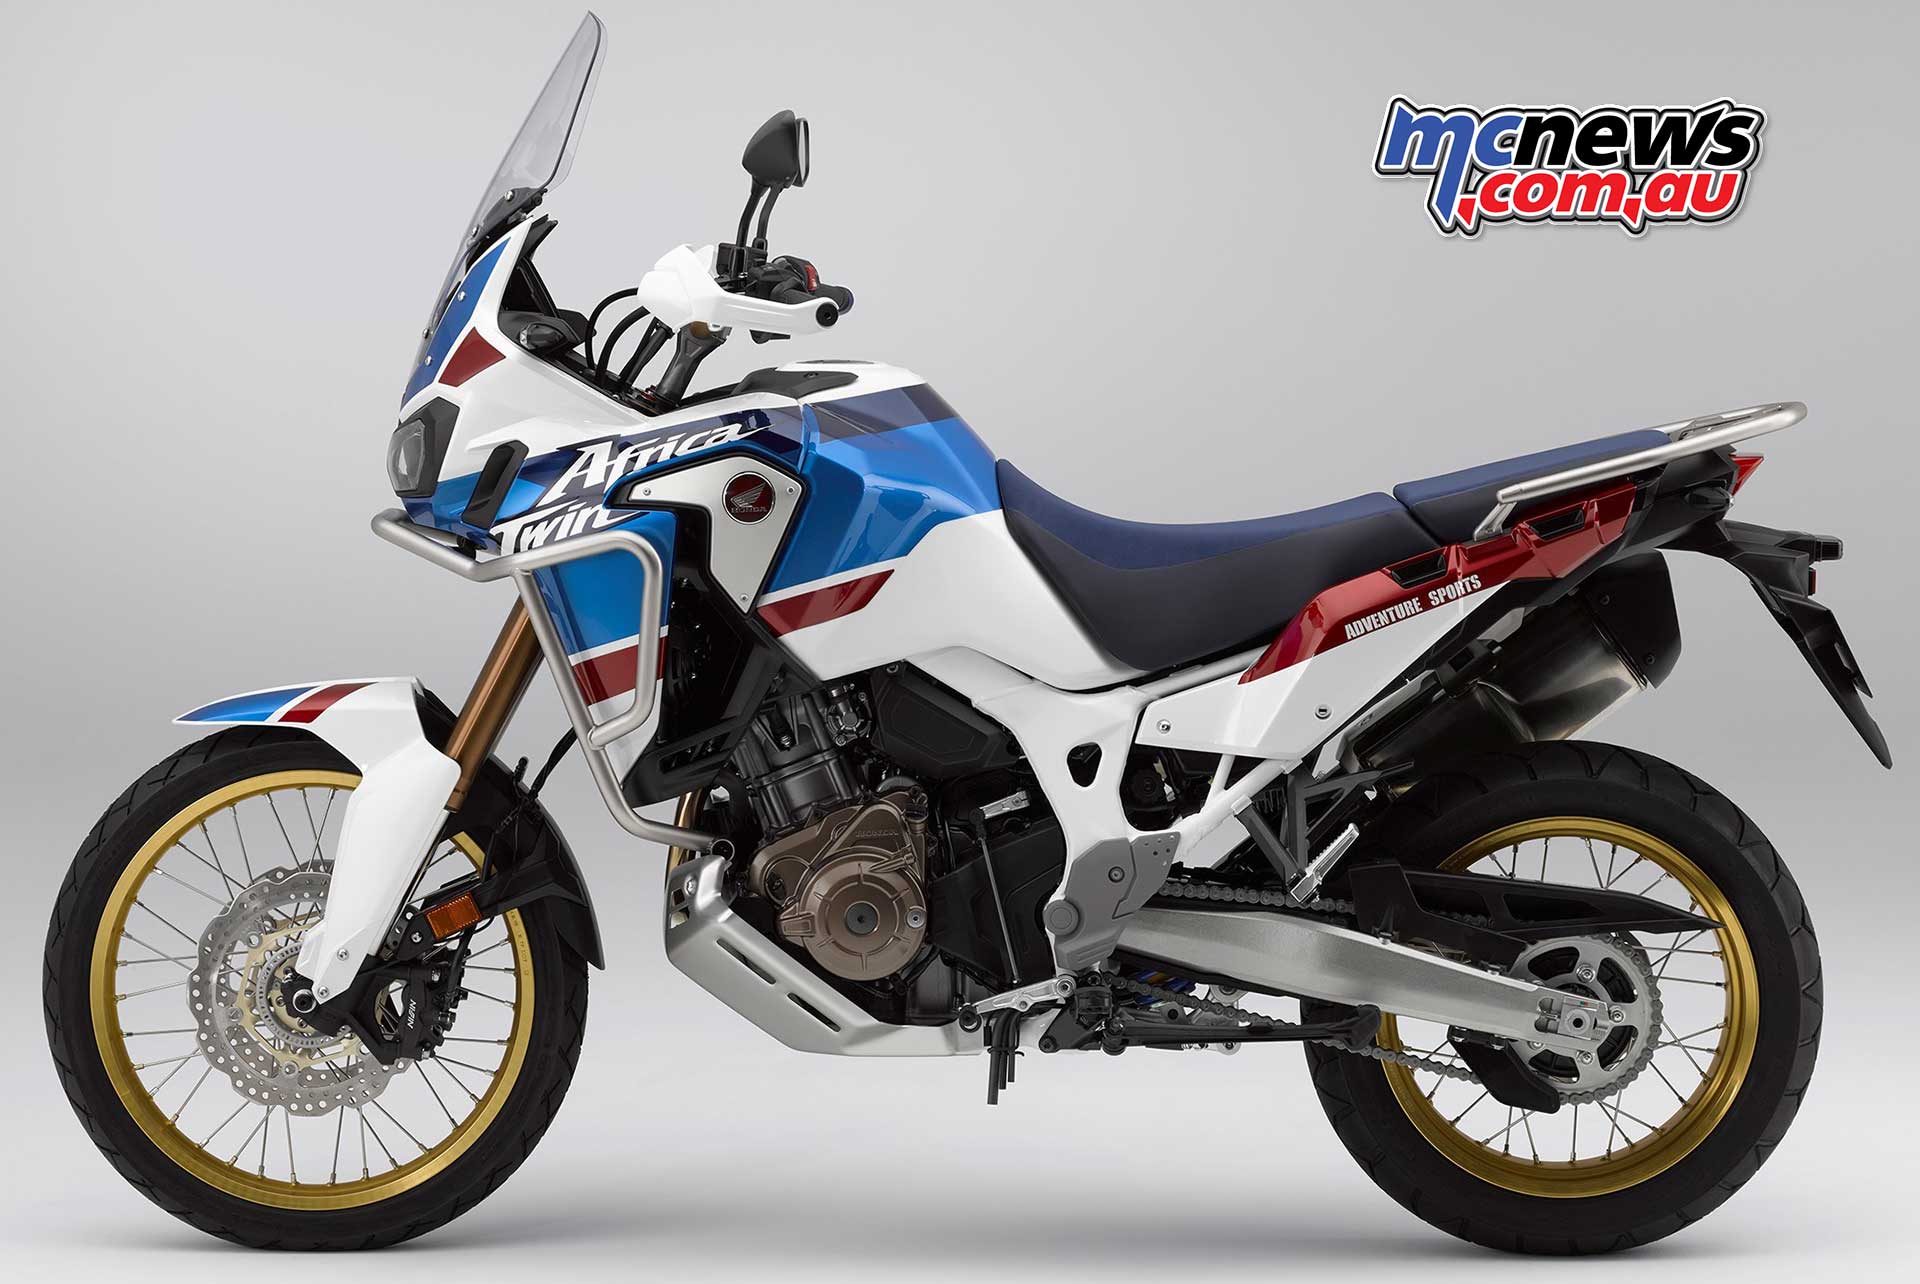 2019 Africa Twin Adventure Sports Now In Dealers | Motorcycle News